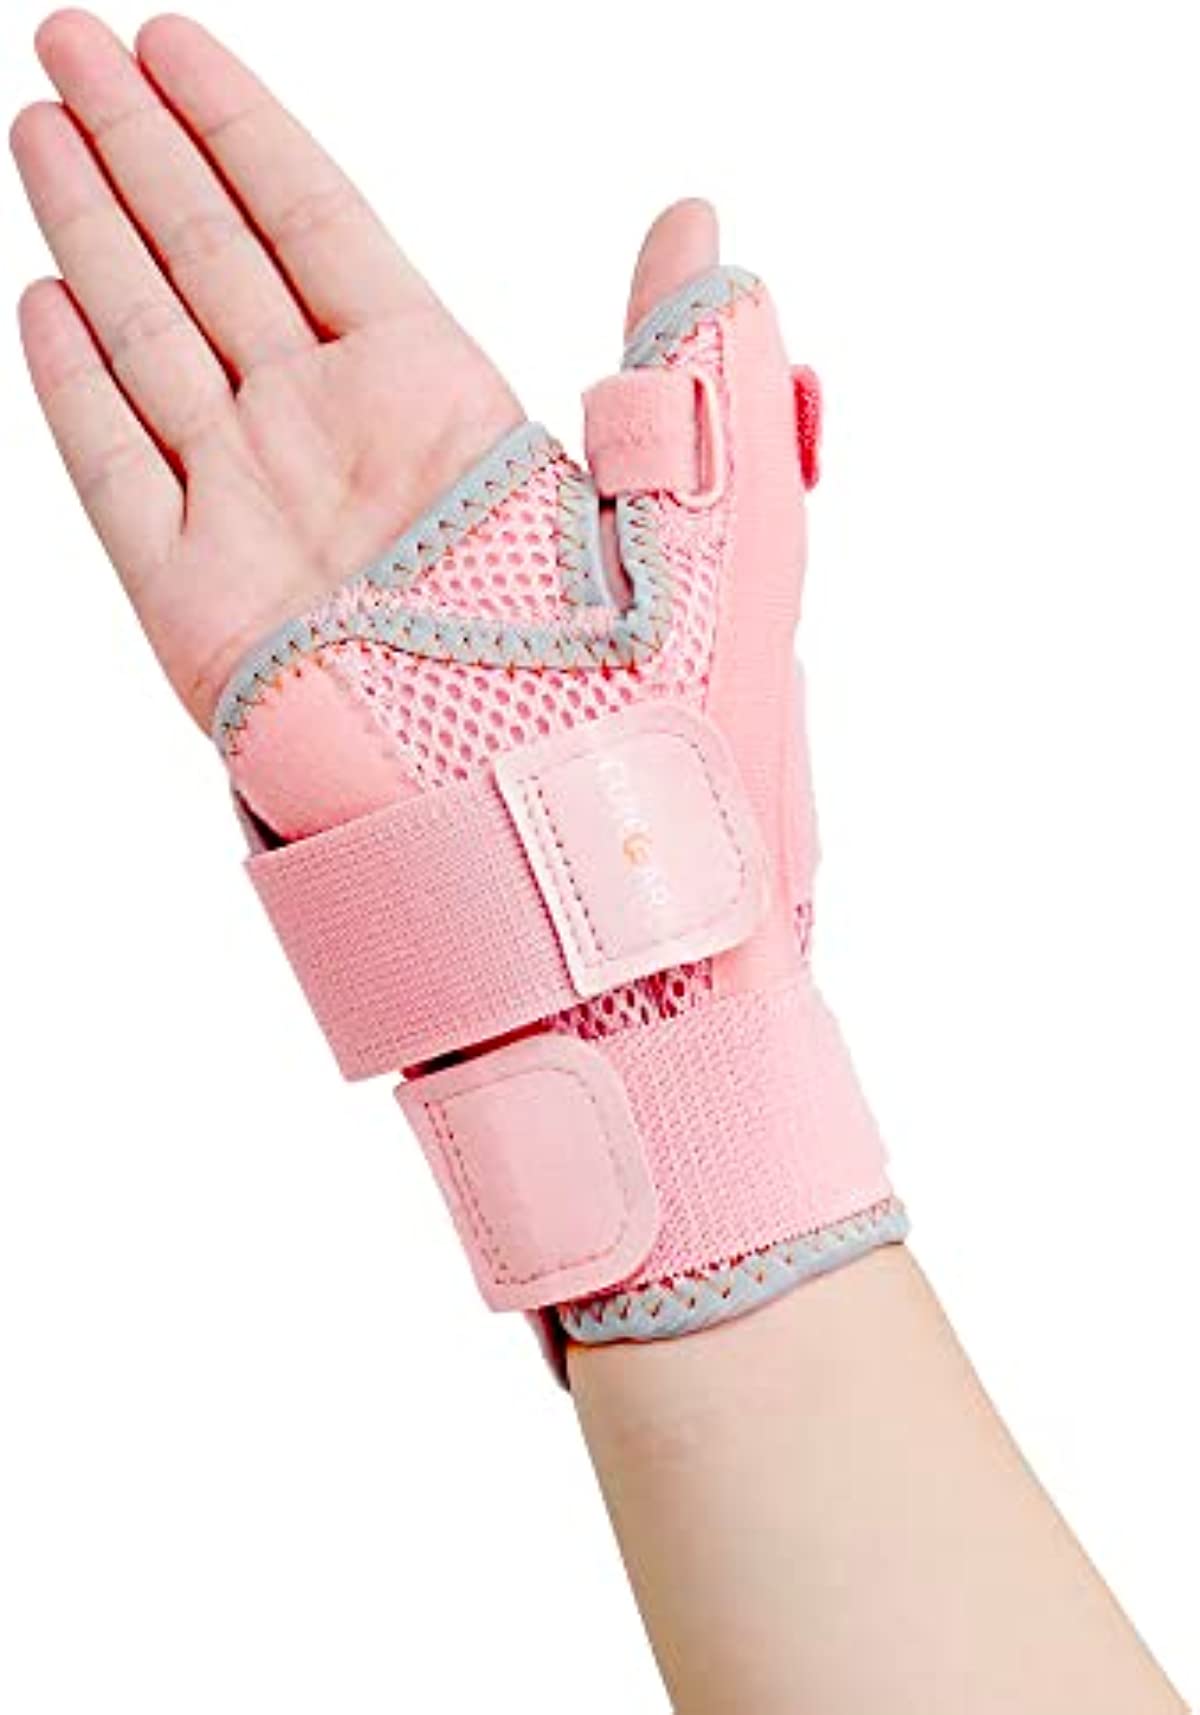 2022 New Upgraded Thumb Splint for Right & Left Hand, Reversible Thumb Brace for Arthritis Pain And Support, Thumb Stabilizer for Sprains, Tendonitis Relief, One Size Fits Any Hand (Pink)